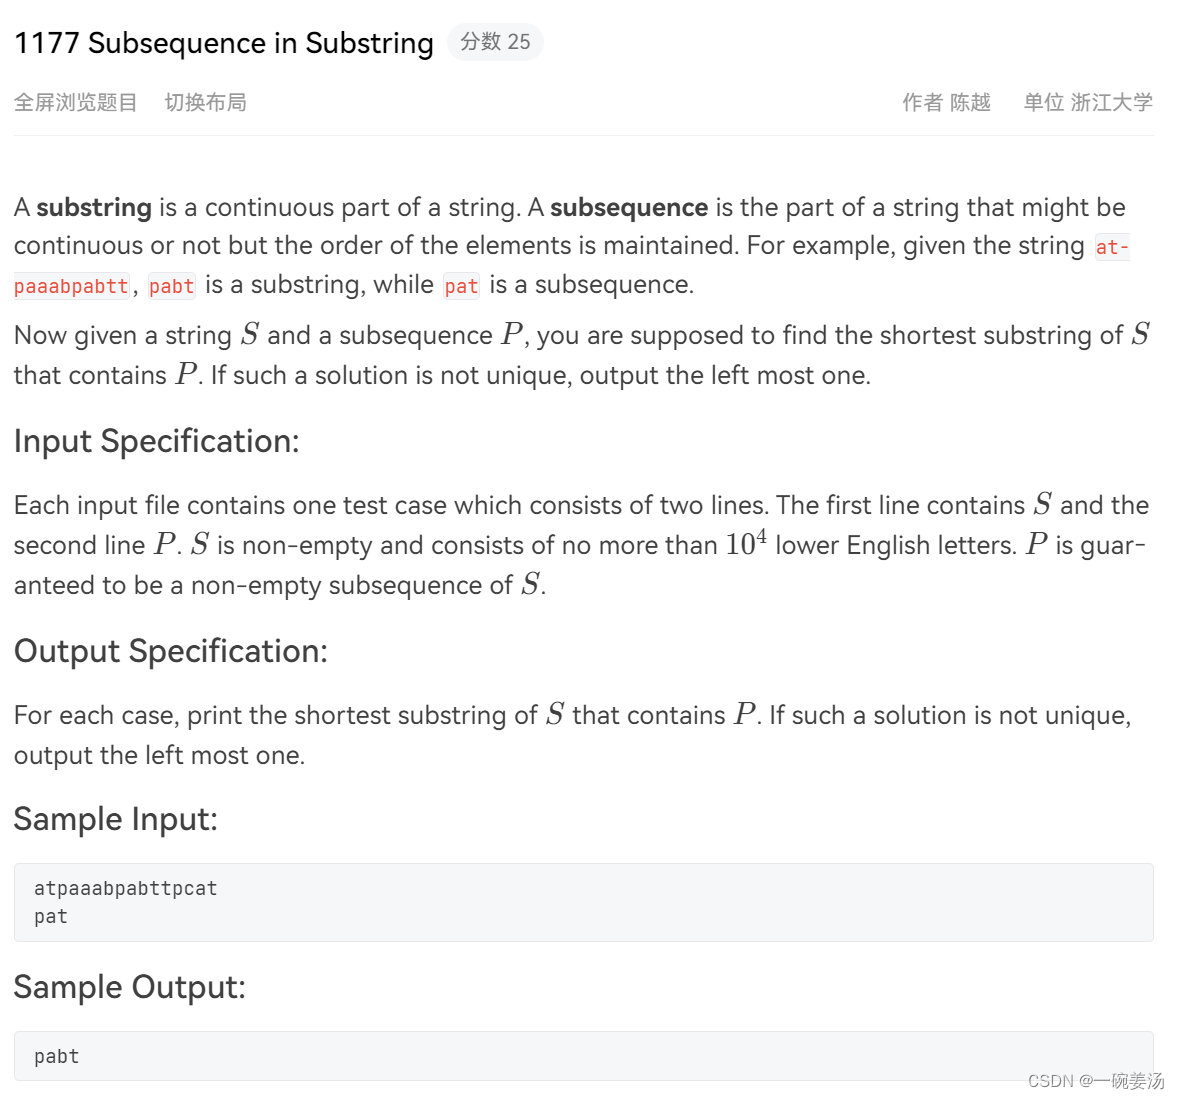 【PAT甲级】1177 Subsequence in Substring（25分）[判断子序列，暴力，双指针]